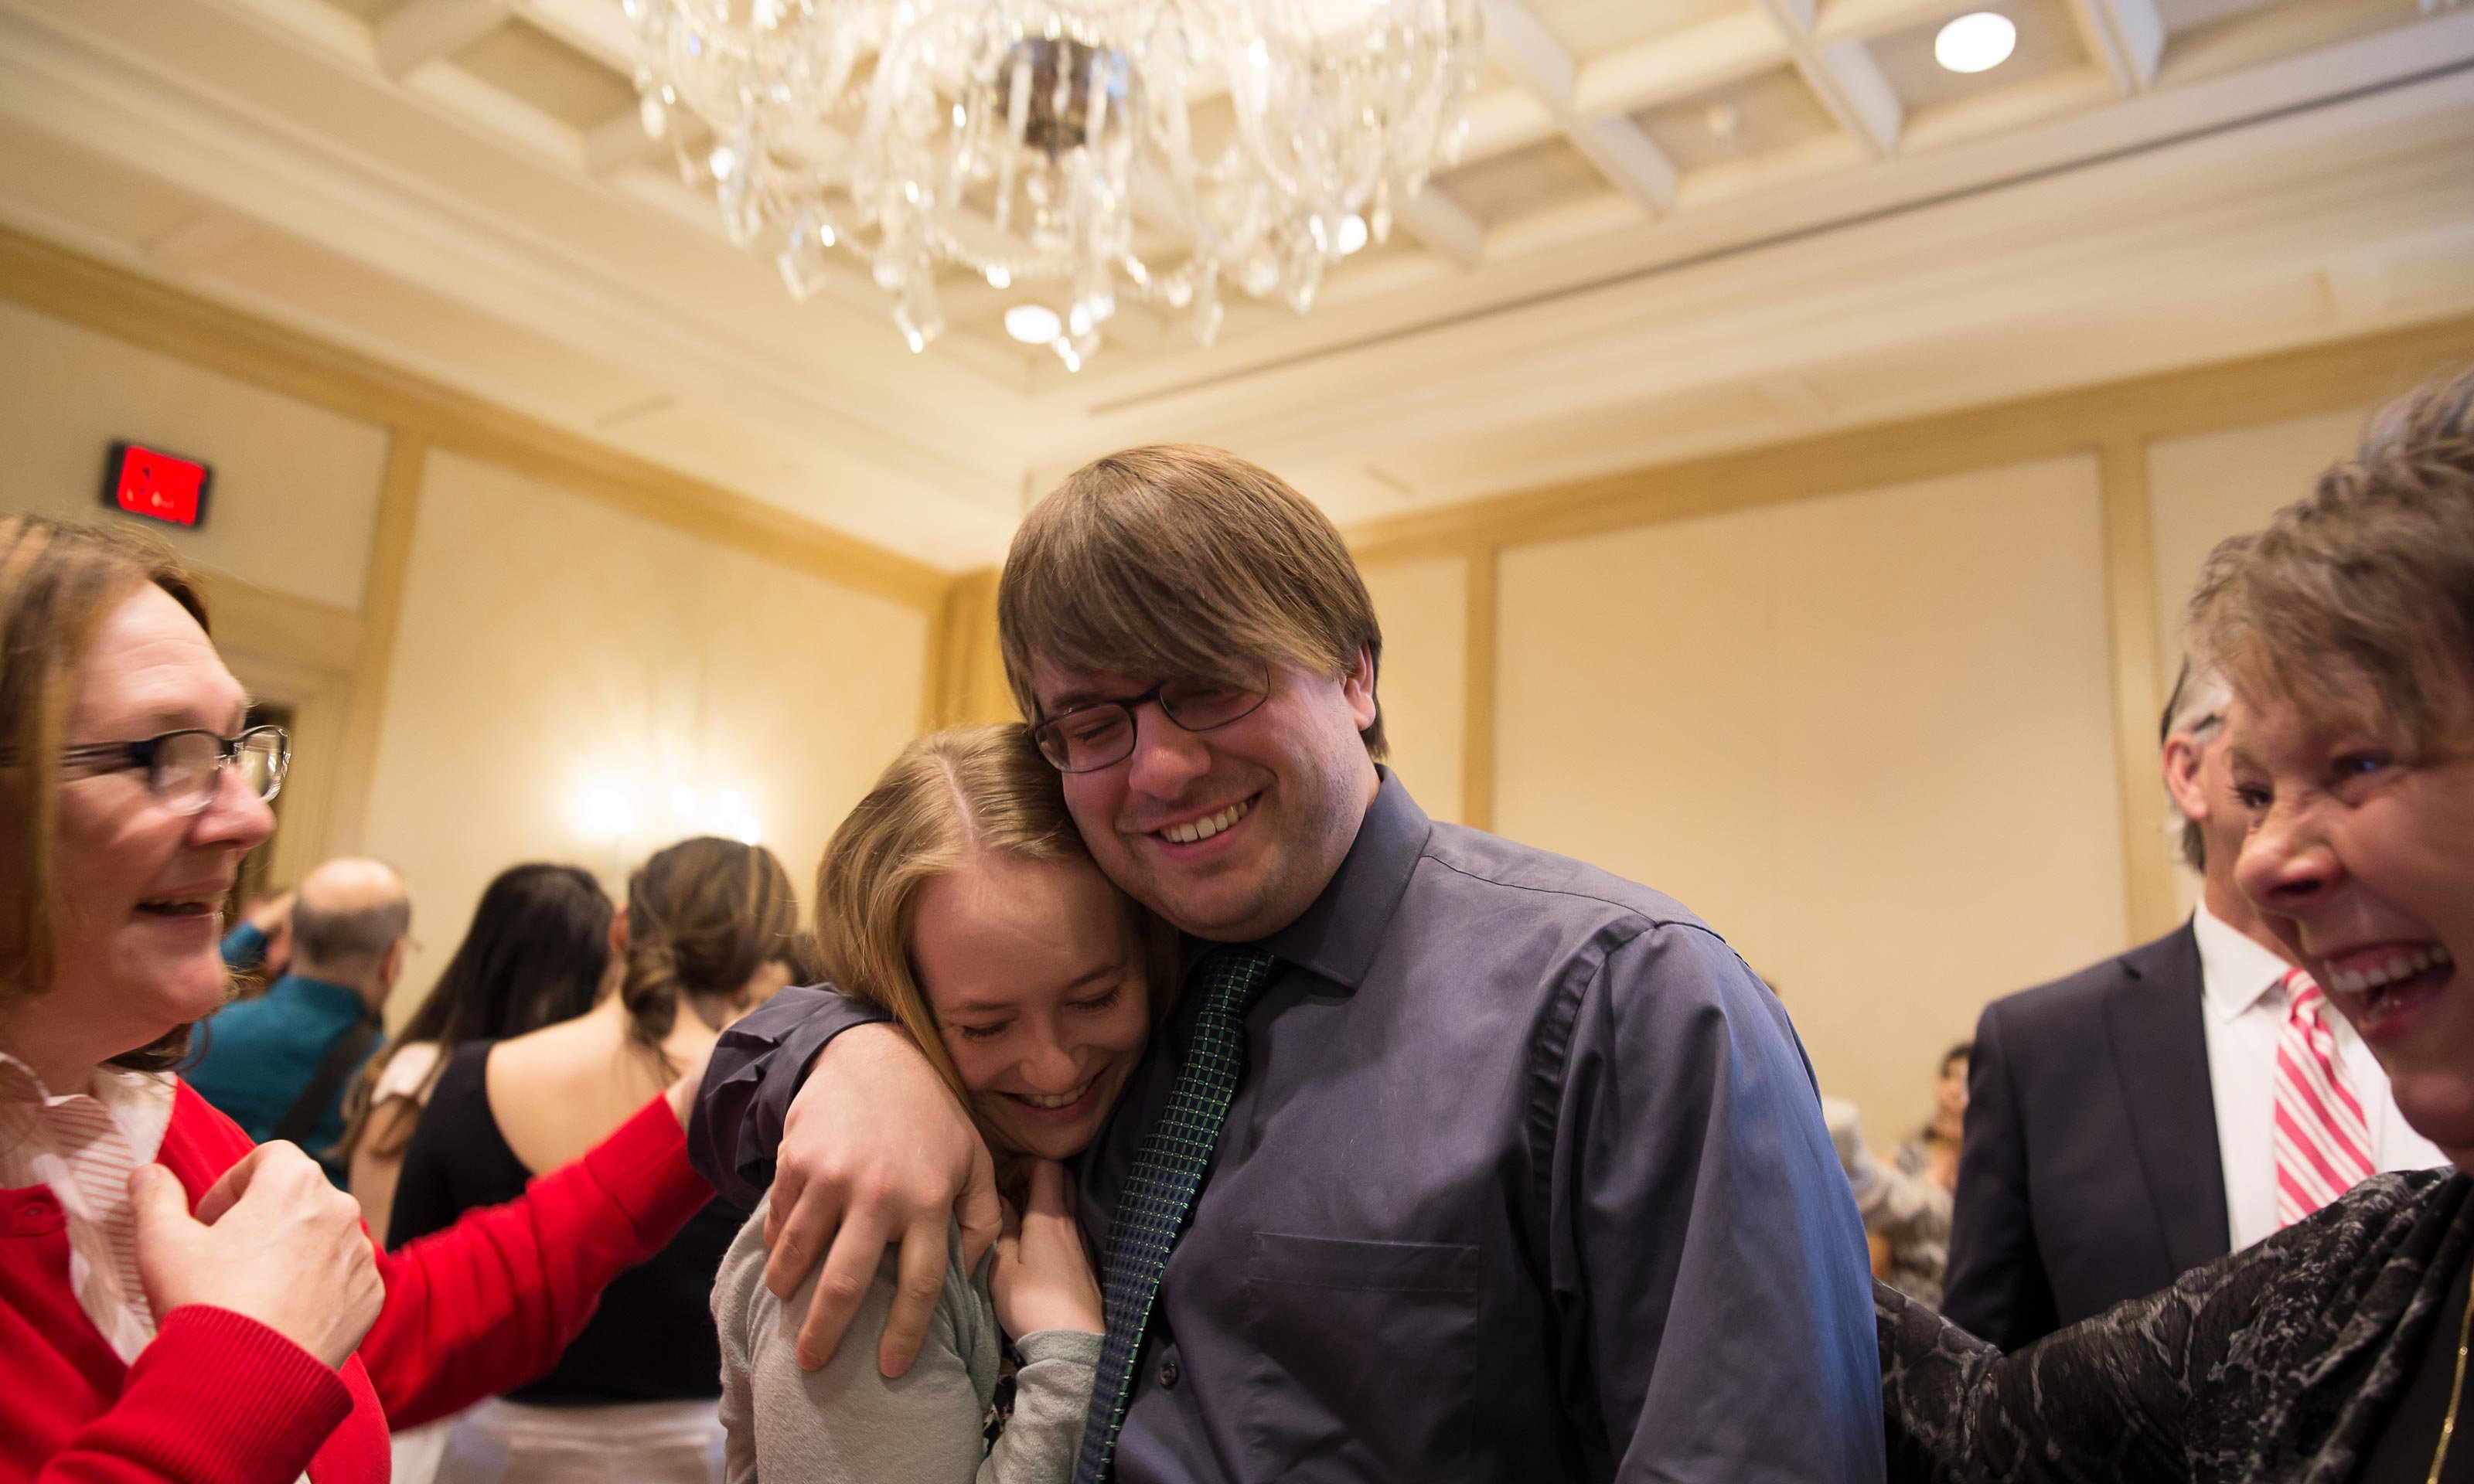 O U W B student celebrating his residency match at the Match Day 2017 ceremony, held at The Townsend Hotel in Birmingham, Michigan. Hugging a female friend in a banquet room.